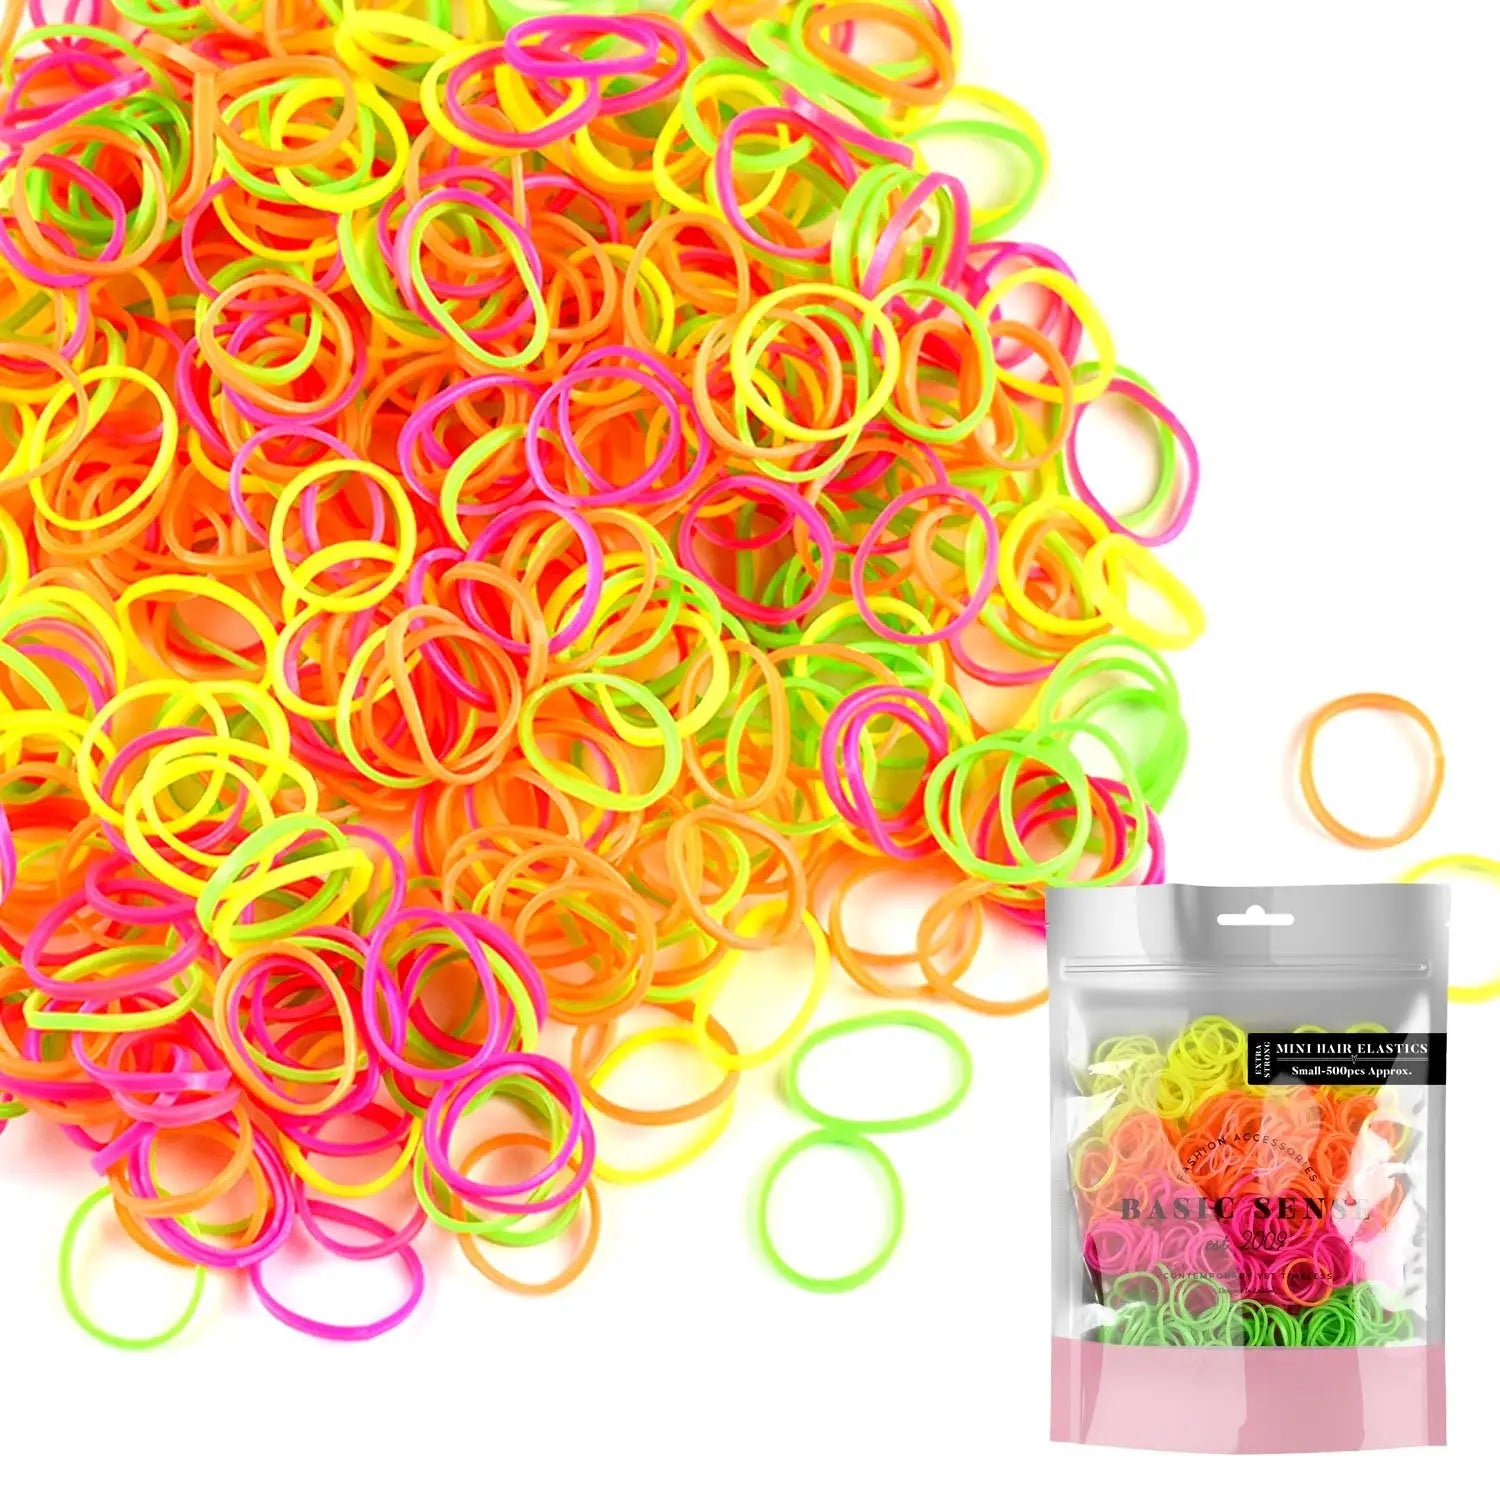 Colorful extra strong mini rubber bands for versatile hair styling options.